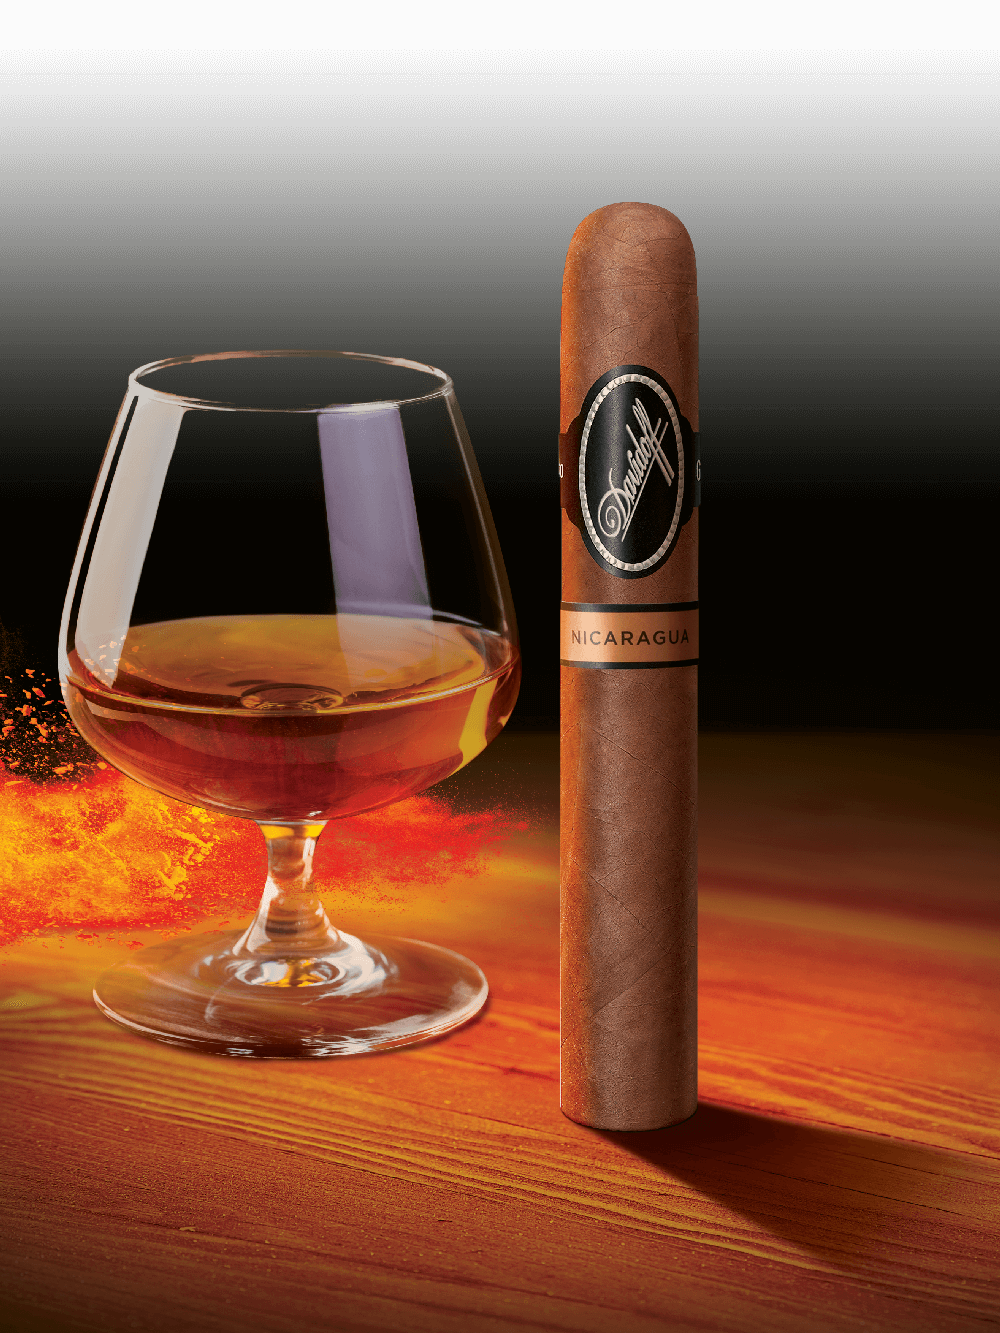 A Davidoff Nicaragua cigar standing next to a glass with whisky.